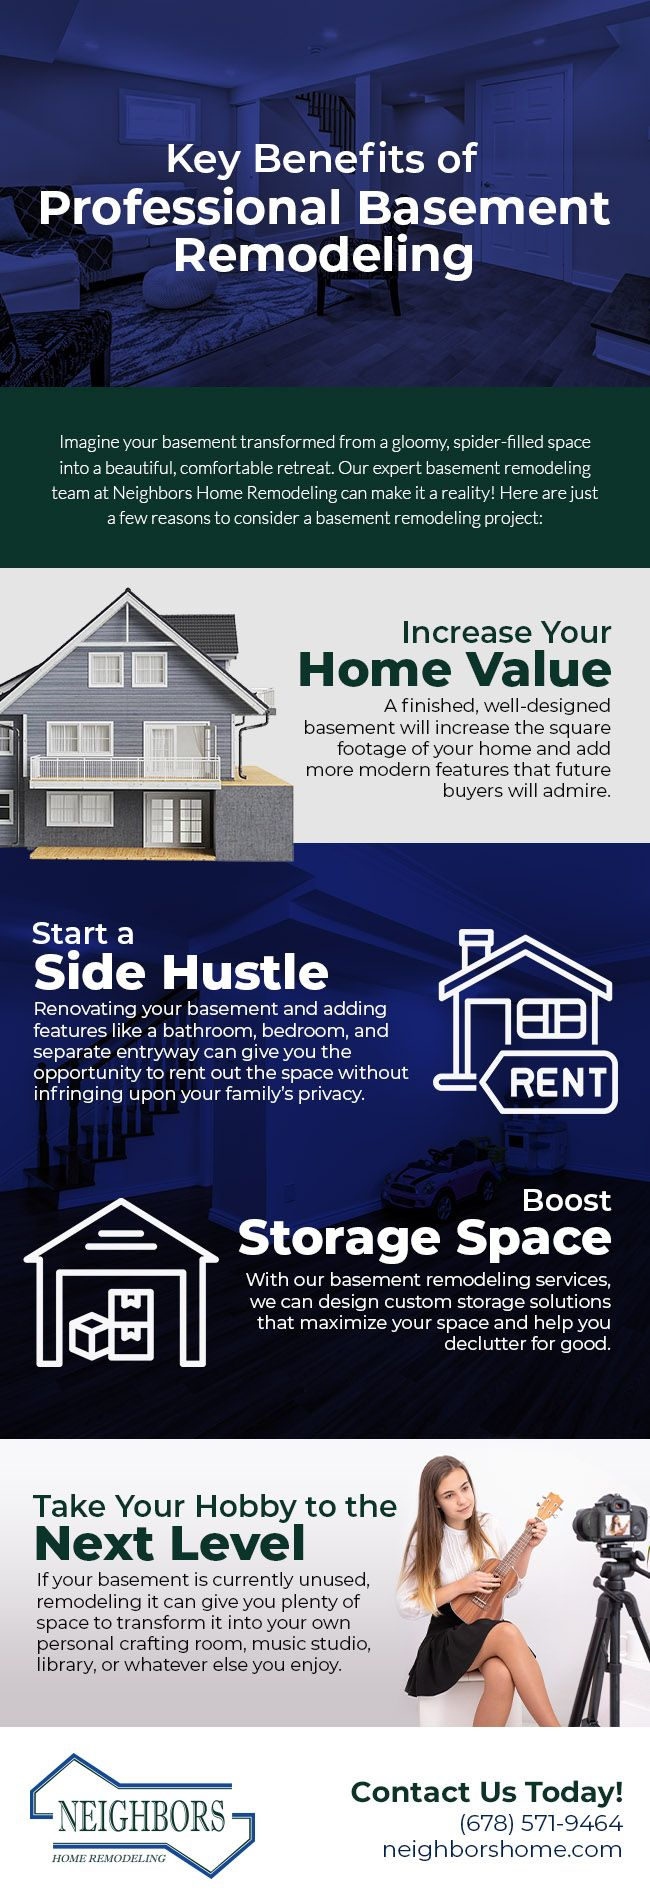 Key Benefits of Professional Basement Remodeling [infographic]